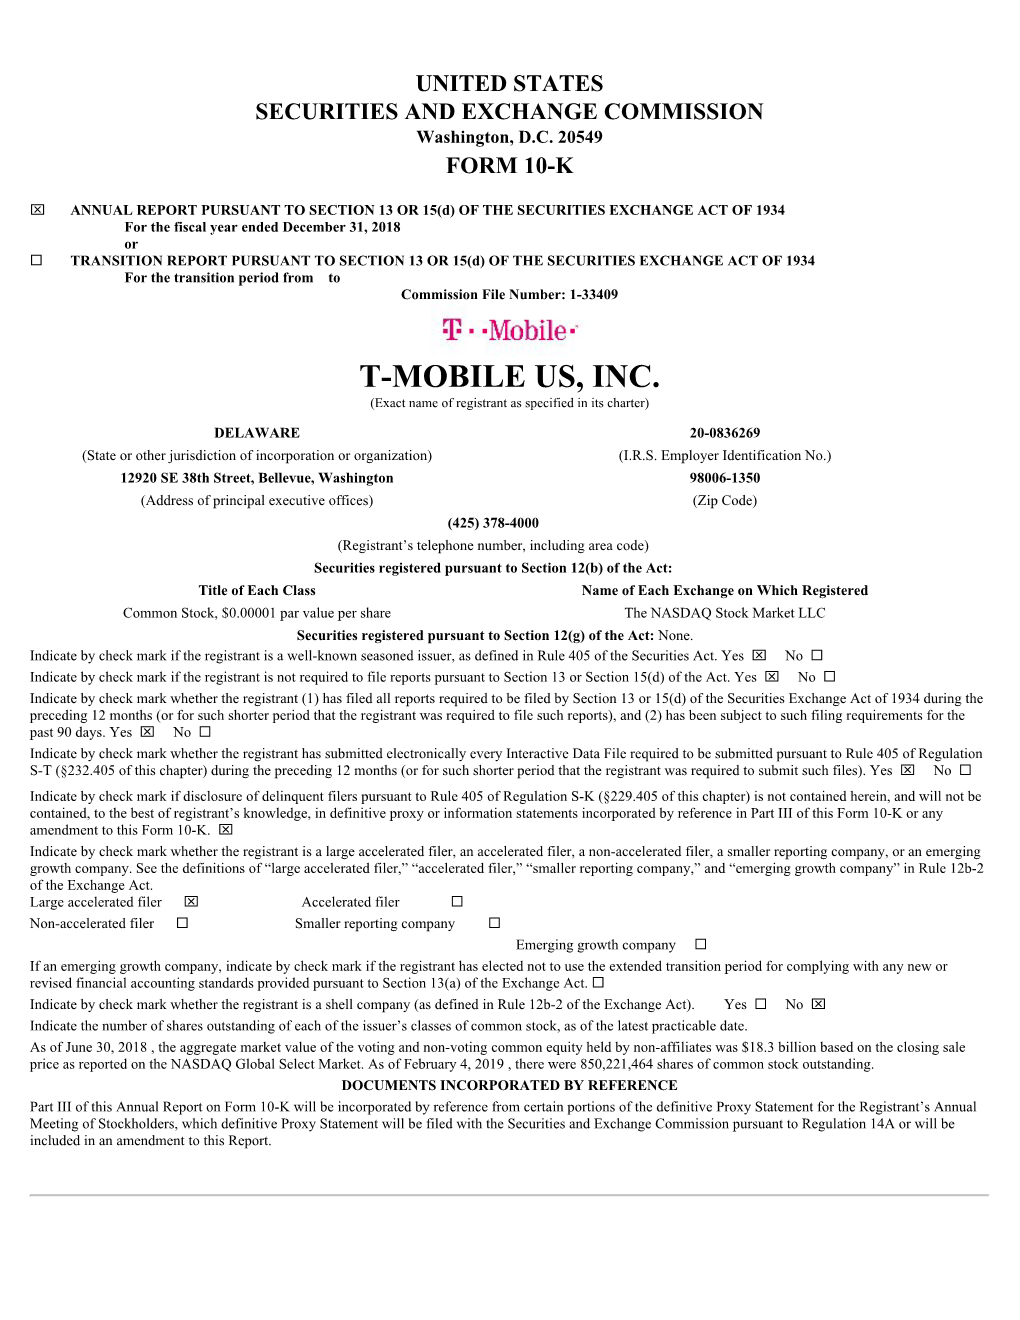 T-MOBILE US, INC. (Exact Name of Registrant As Specified in Its Charter)